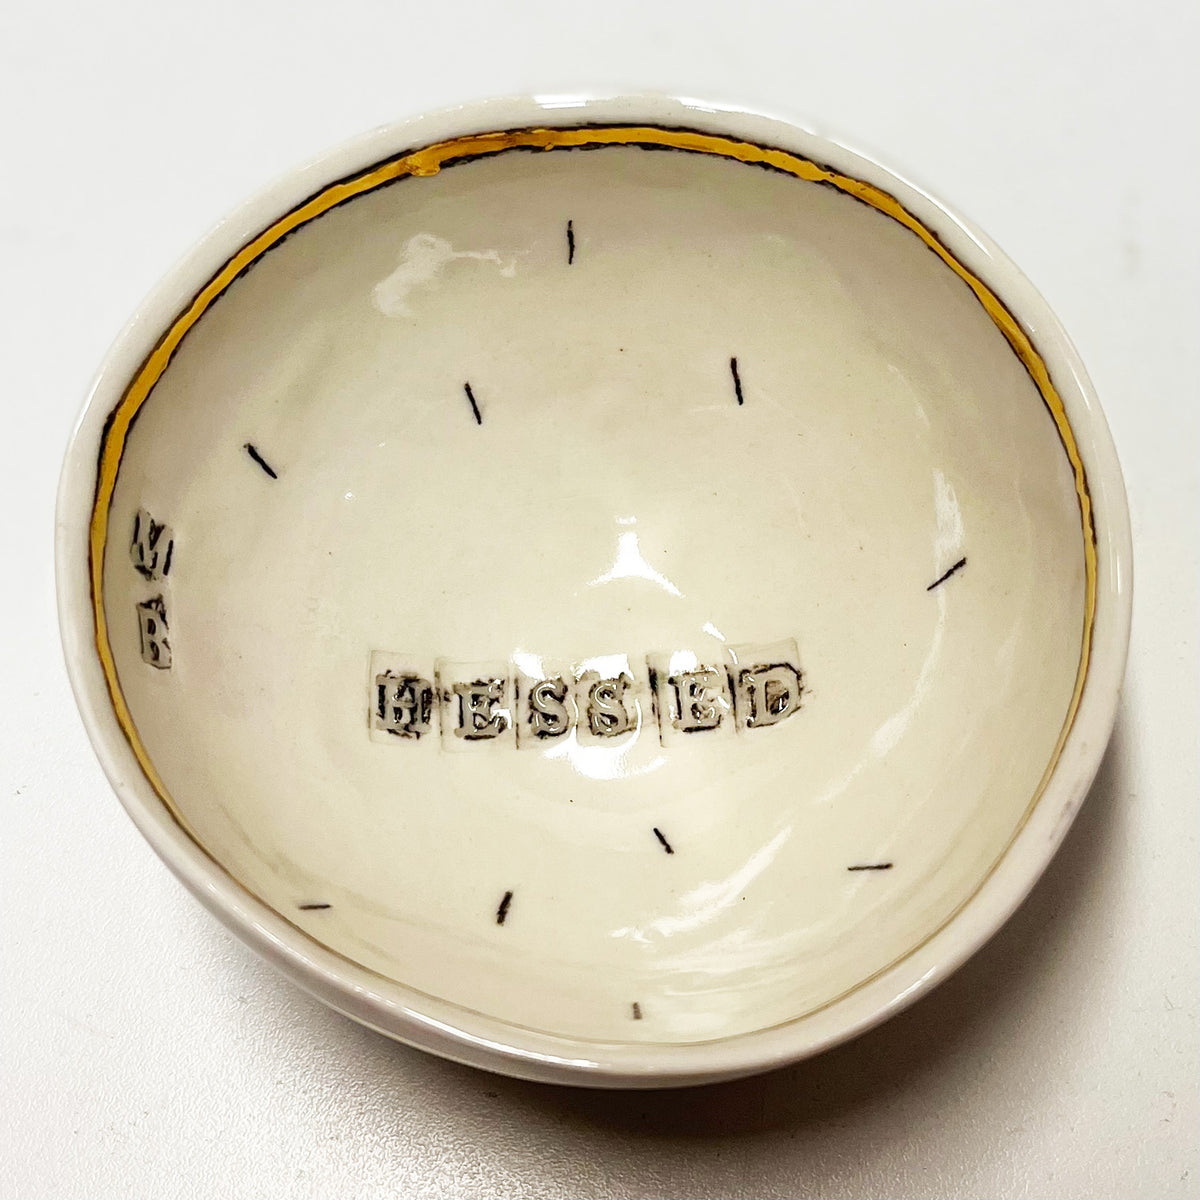 Marla Buck - Blessed Small Bowl, 4" x 4" x 2"